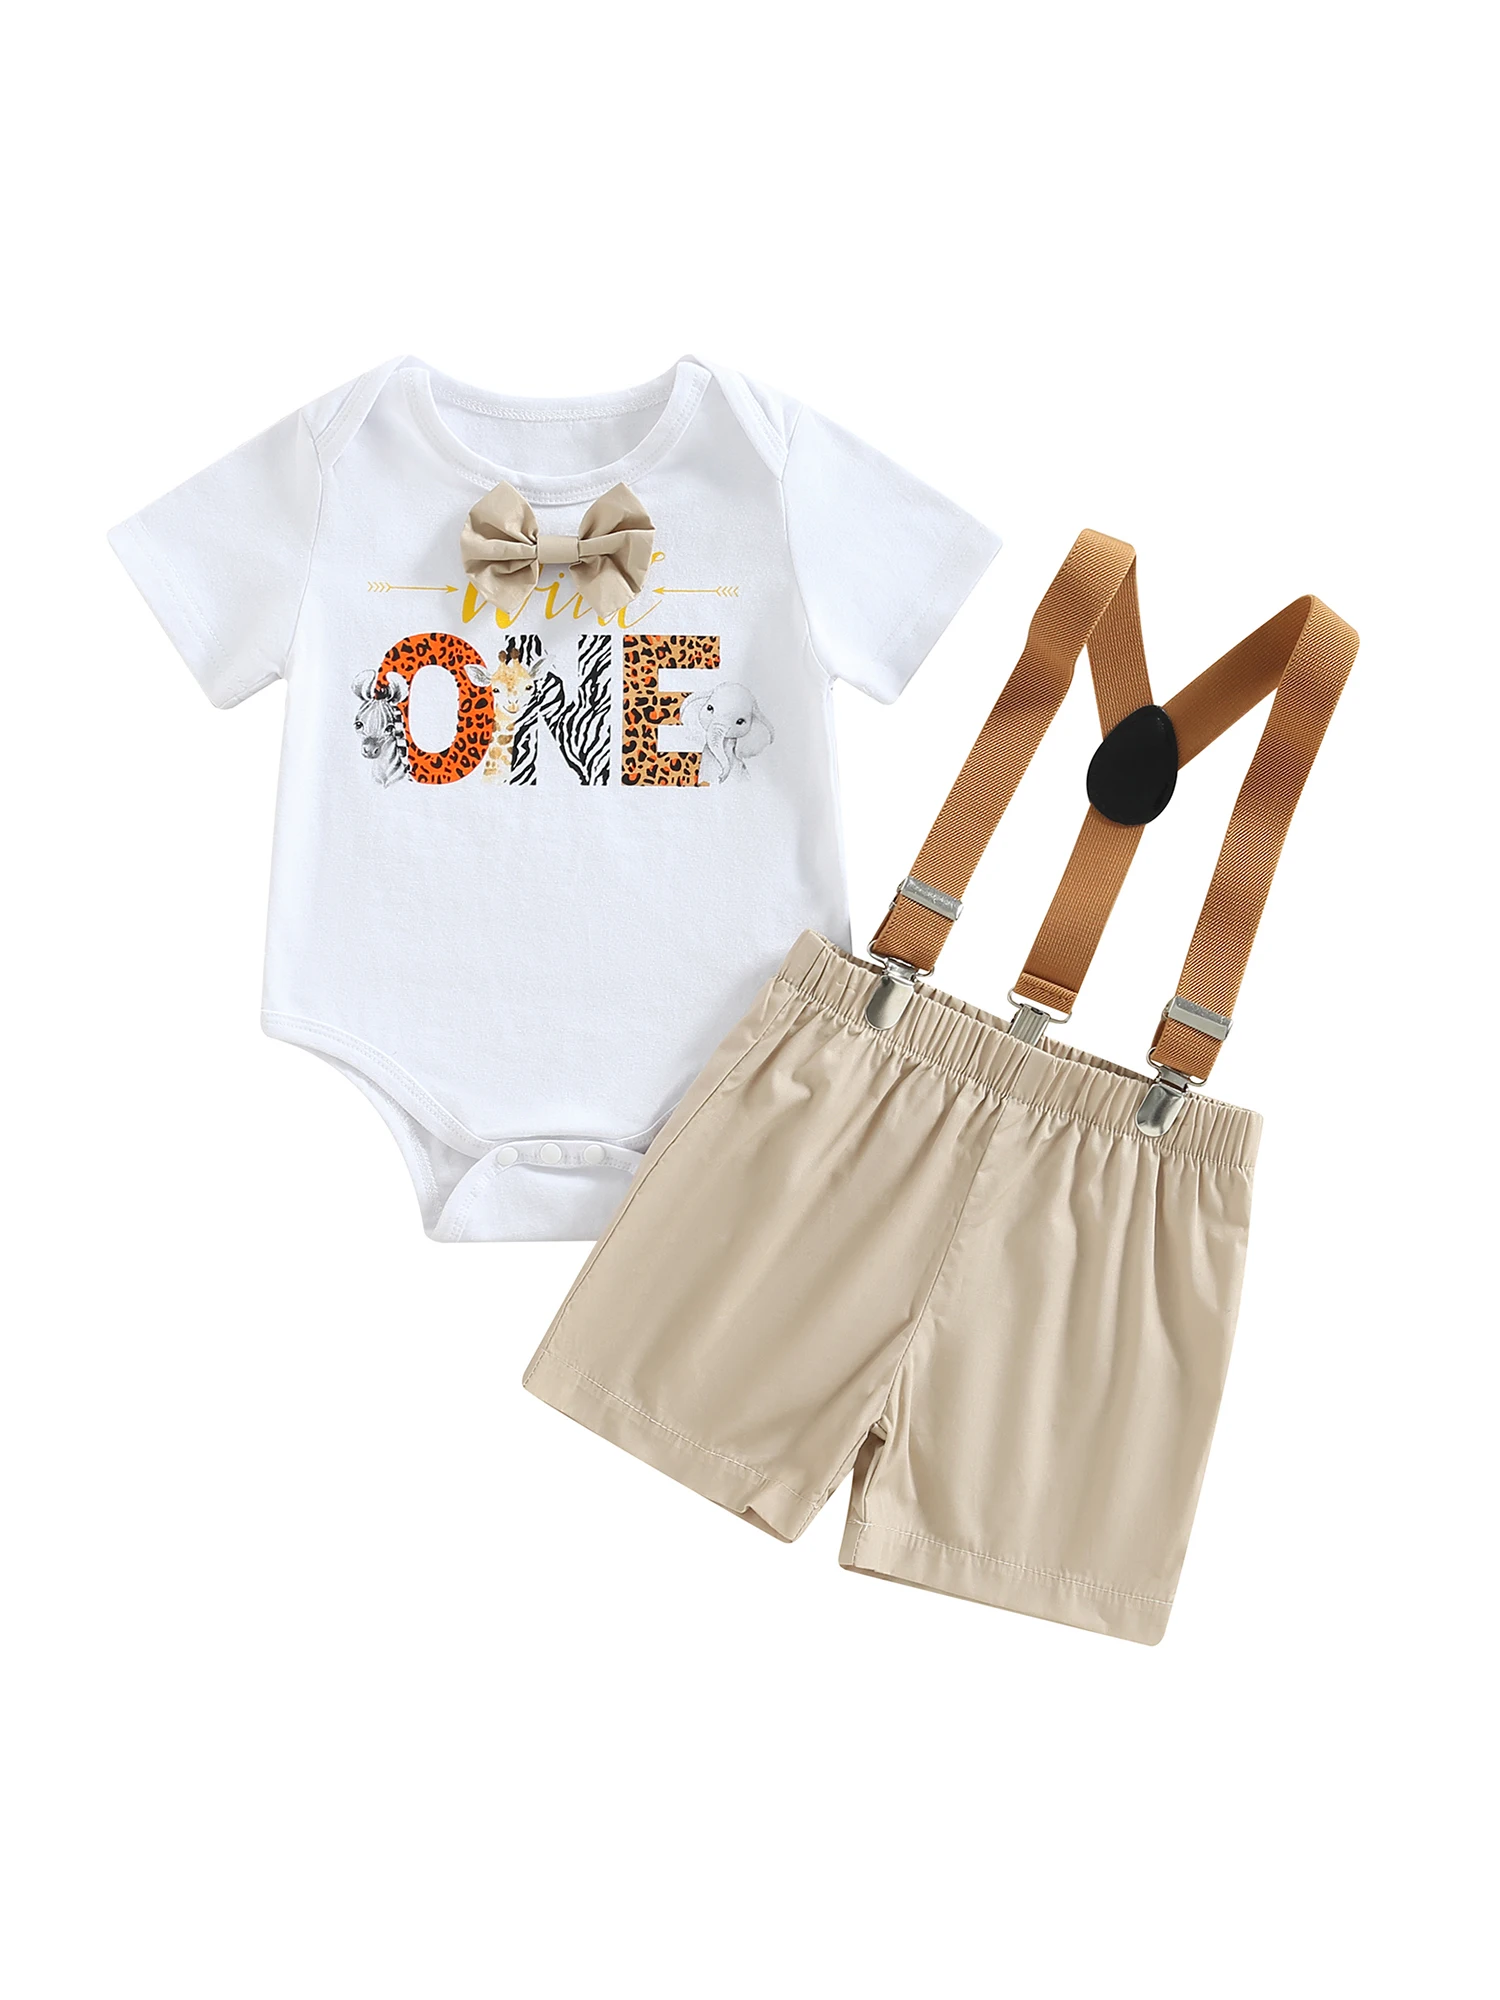 Newrborn Baby Boy First Birthday Outfit Wild One Letter Print Bowtie Romper Suspender Shorts 2PCS Boy Summer Clothes